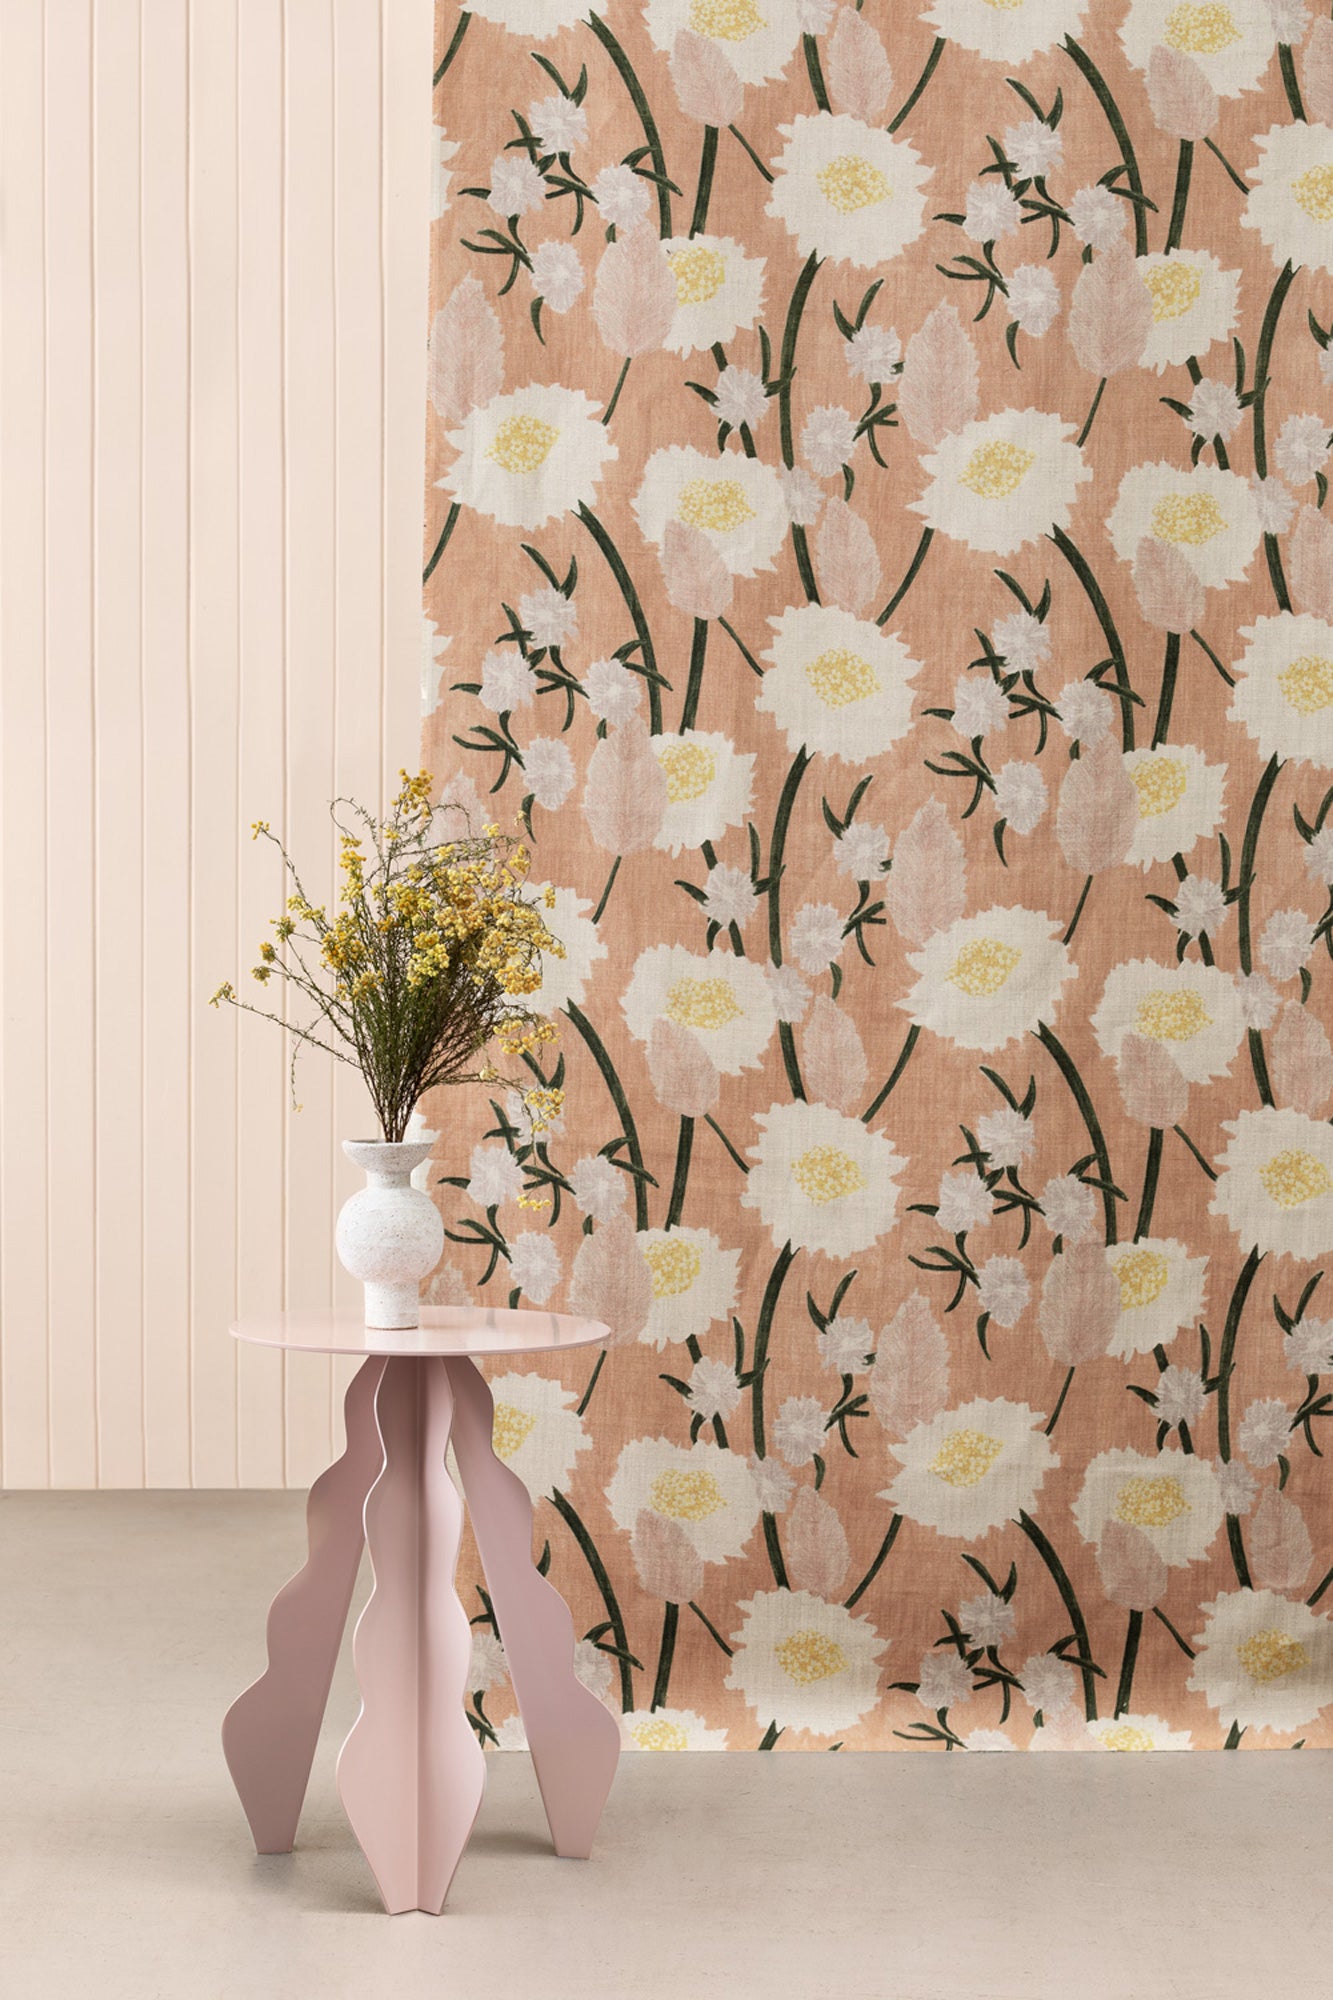 A mauve end table stands in front of a fabric curtain in a playful floral print in pink, white, yellow and green.